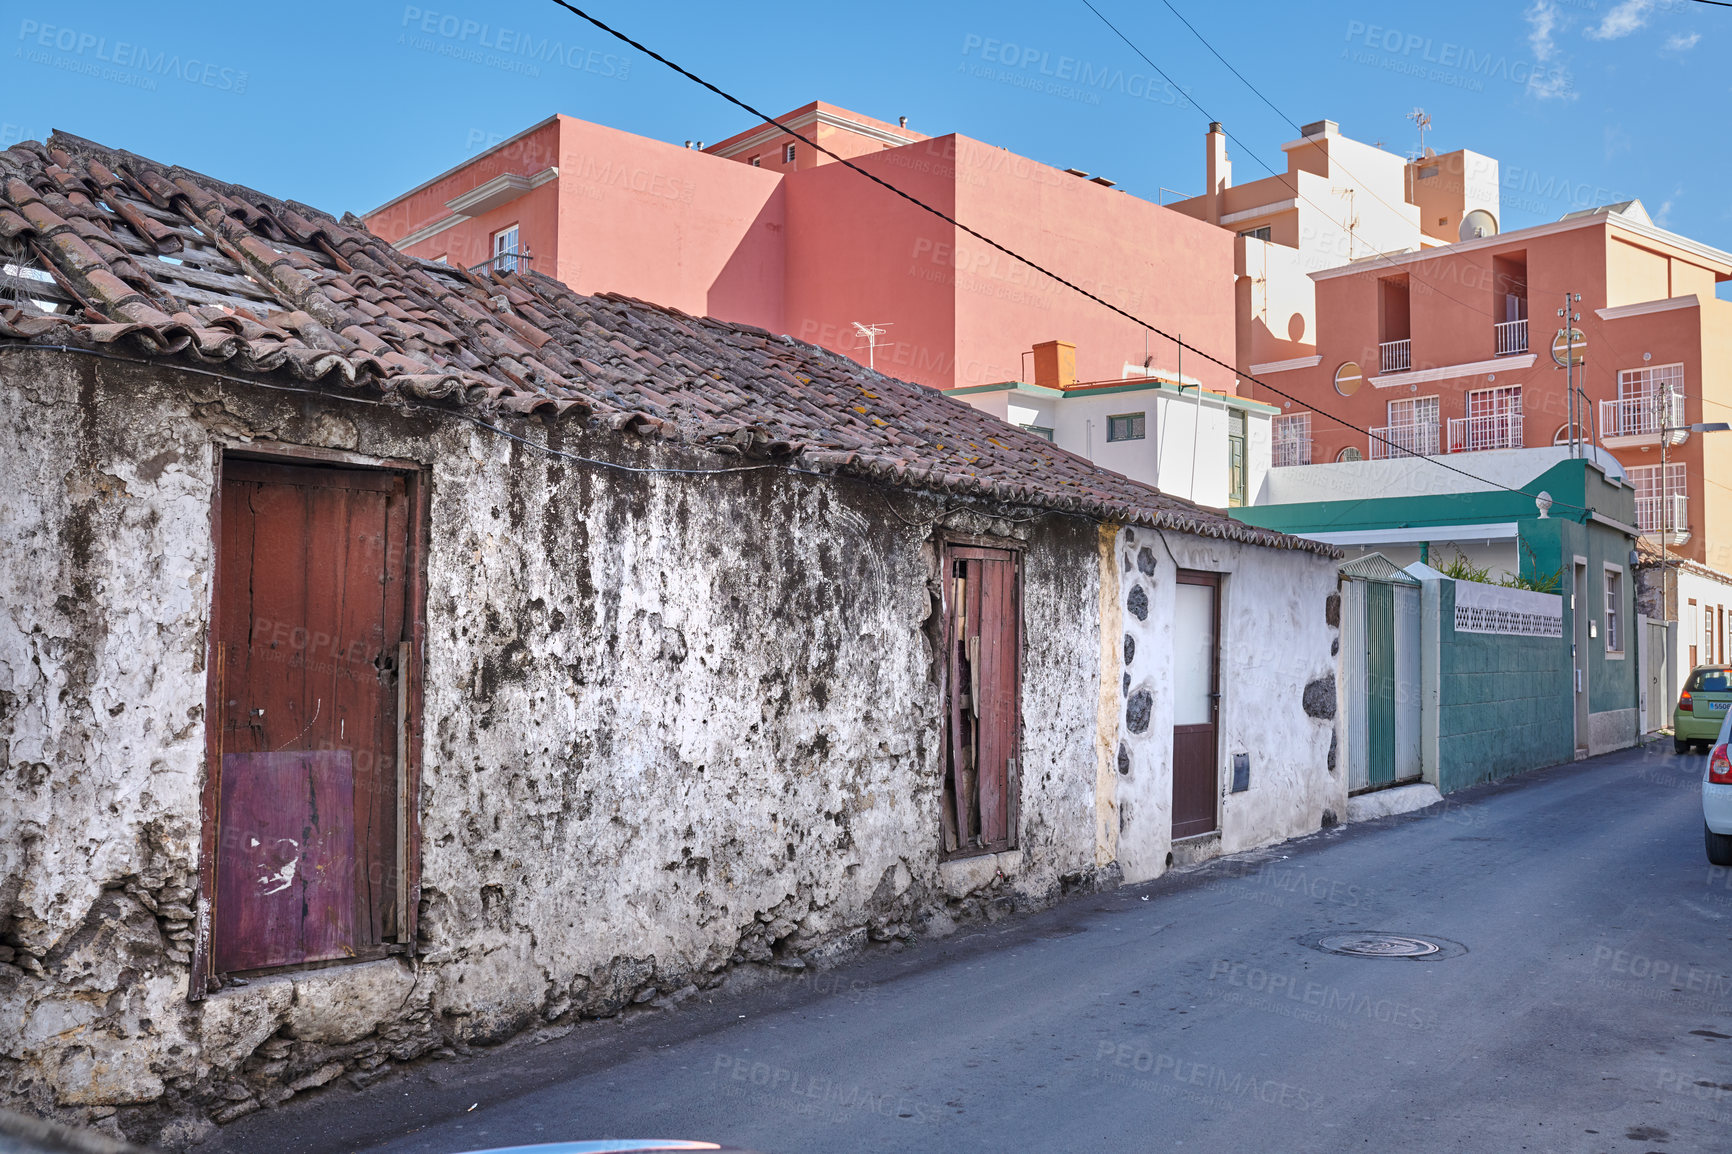 Buy stock photo Exterior of decaying brick buildings with peeling paint in a street of Santa Cruz de La Palma. Architectural details of an abandoned rustic property with damaged and aged doors or entrances outside